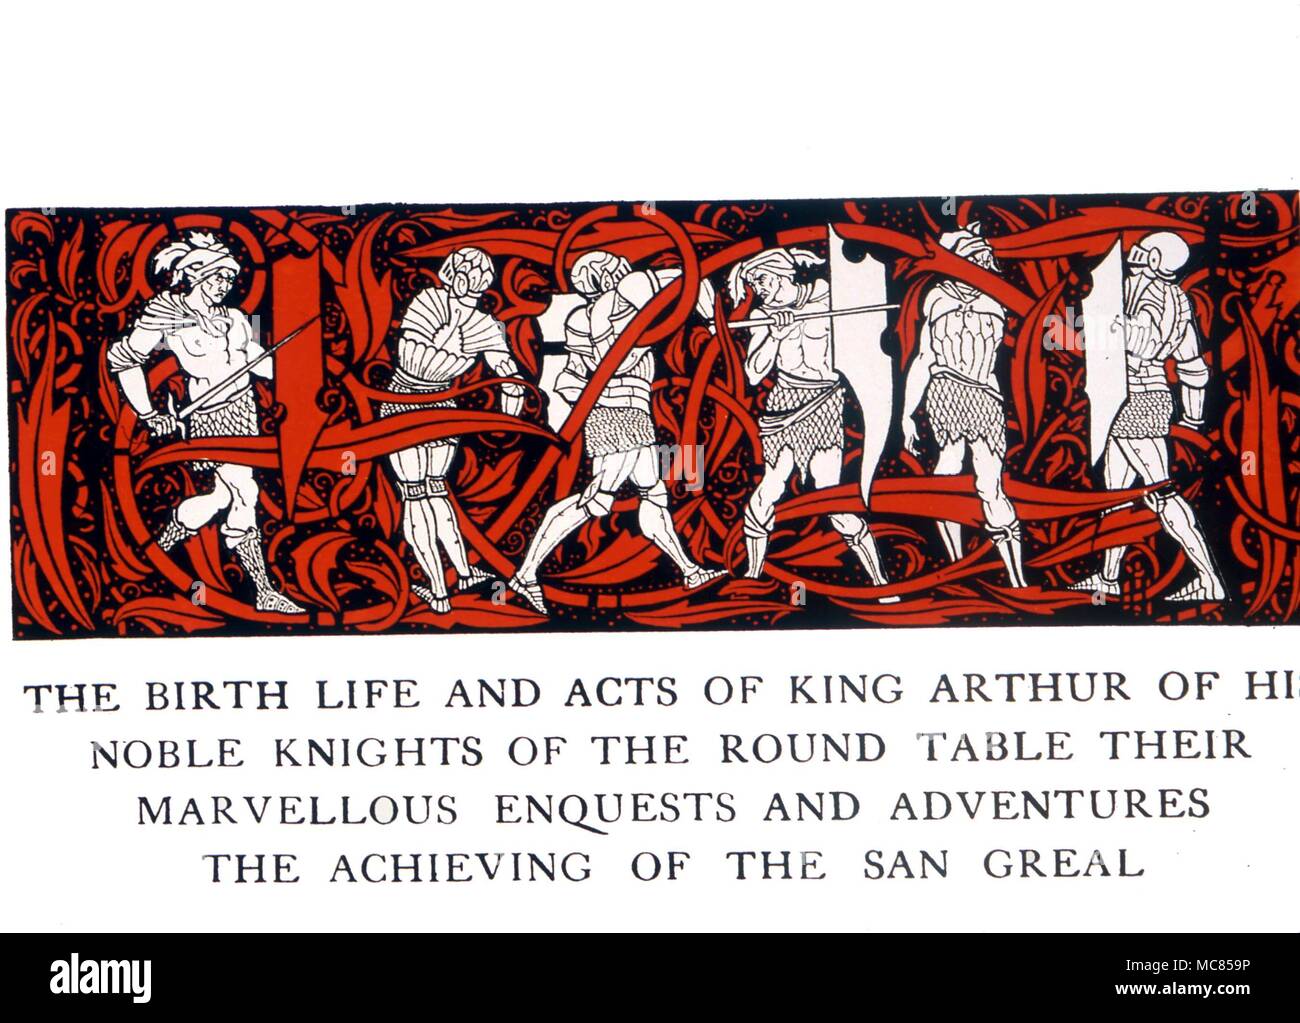 Heading vignette for 'The Birth, Life and Acts of King Arthur'. Stock Photo